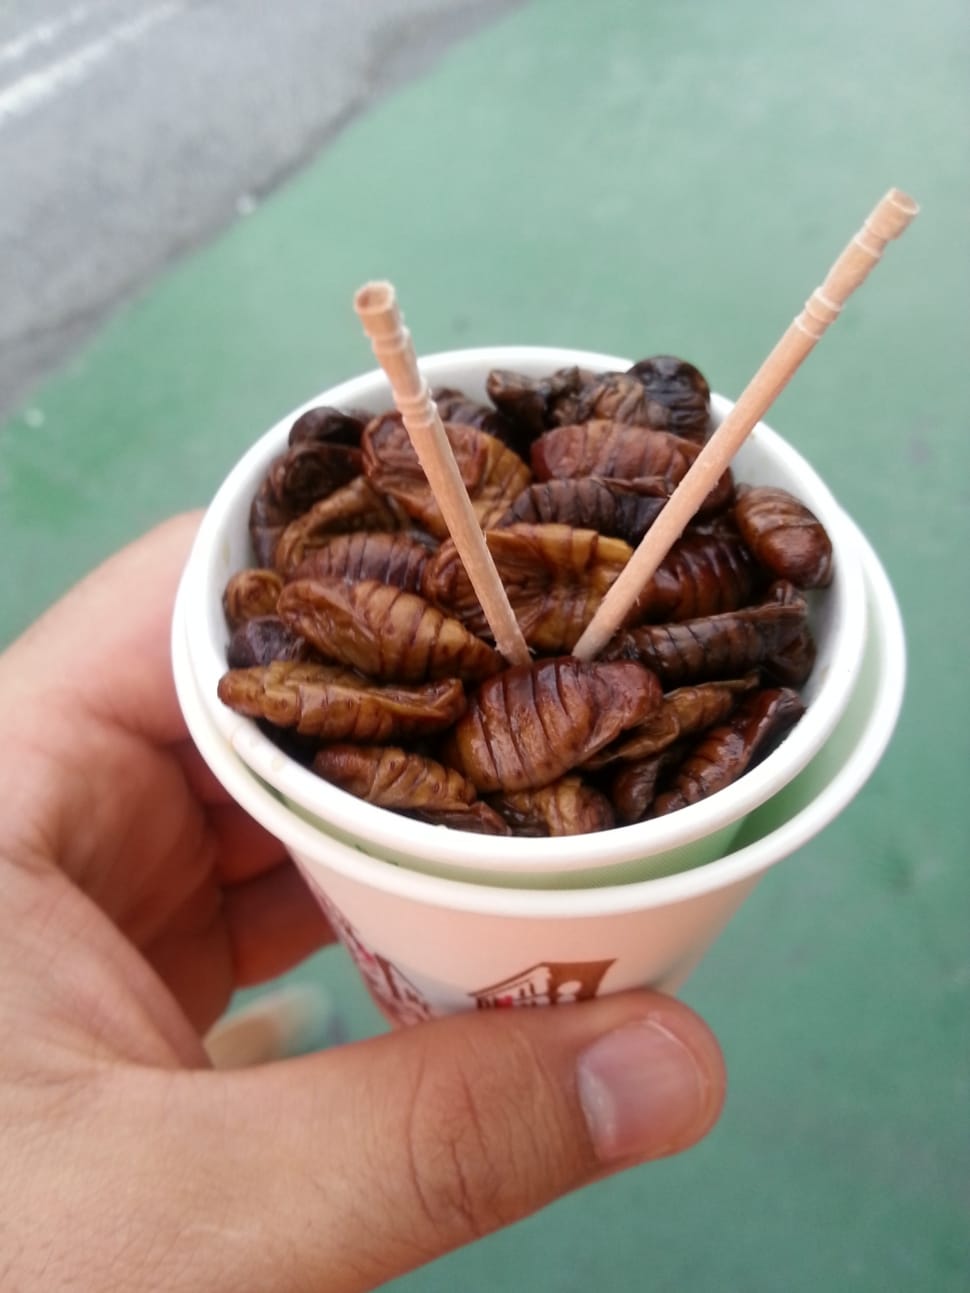 two toothpicks on brown food in white plastic cup preview